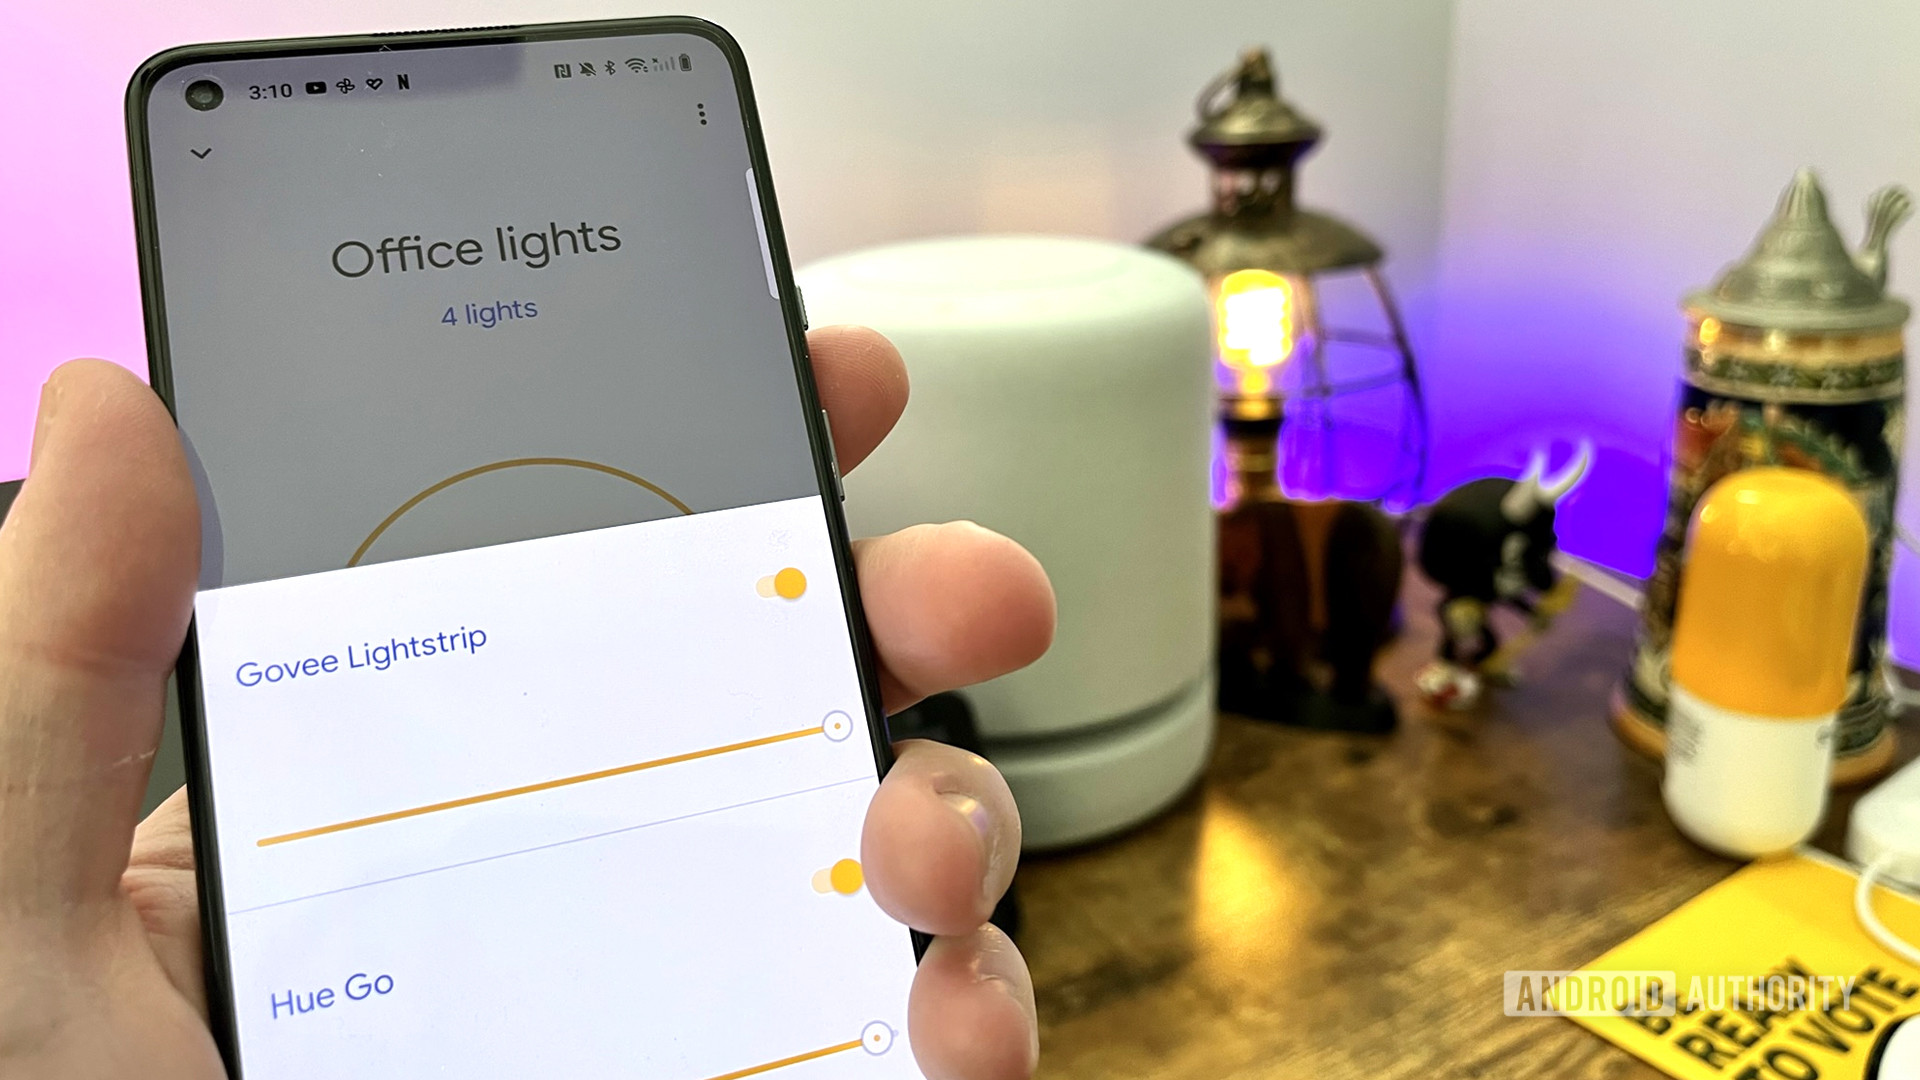 Controlling the Govee Lightstrip on Google Home